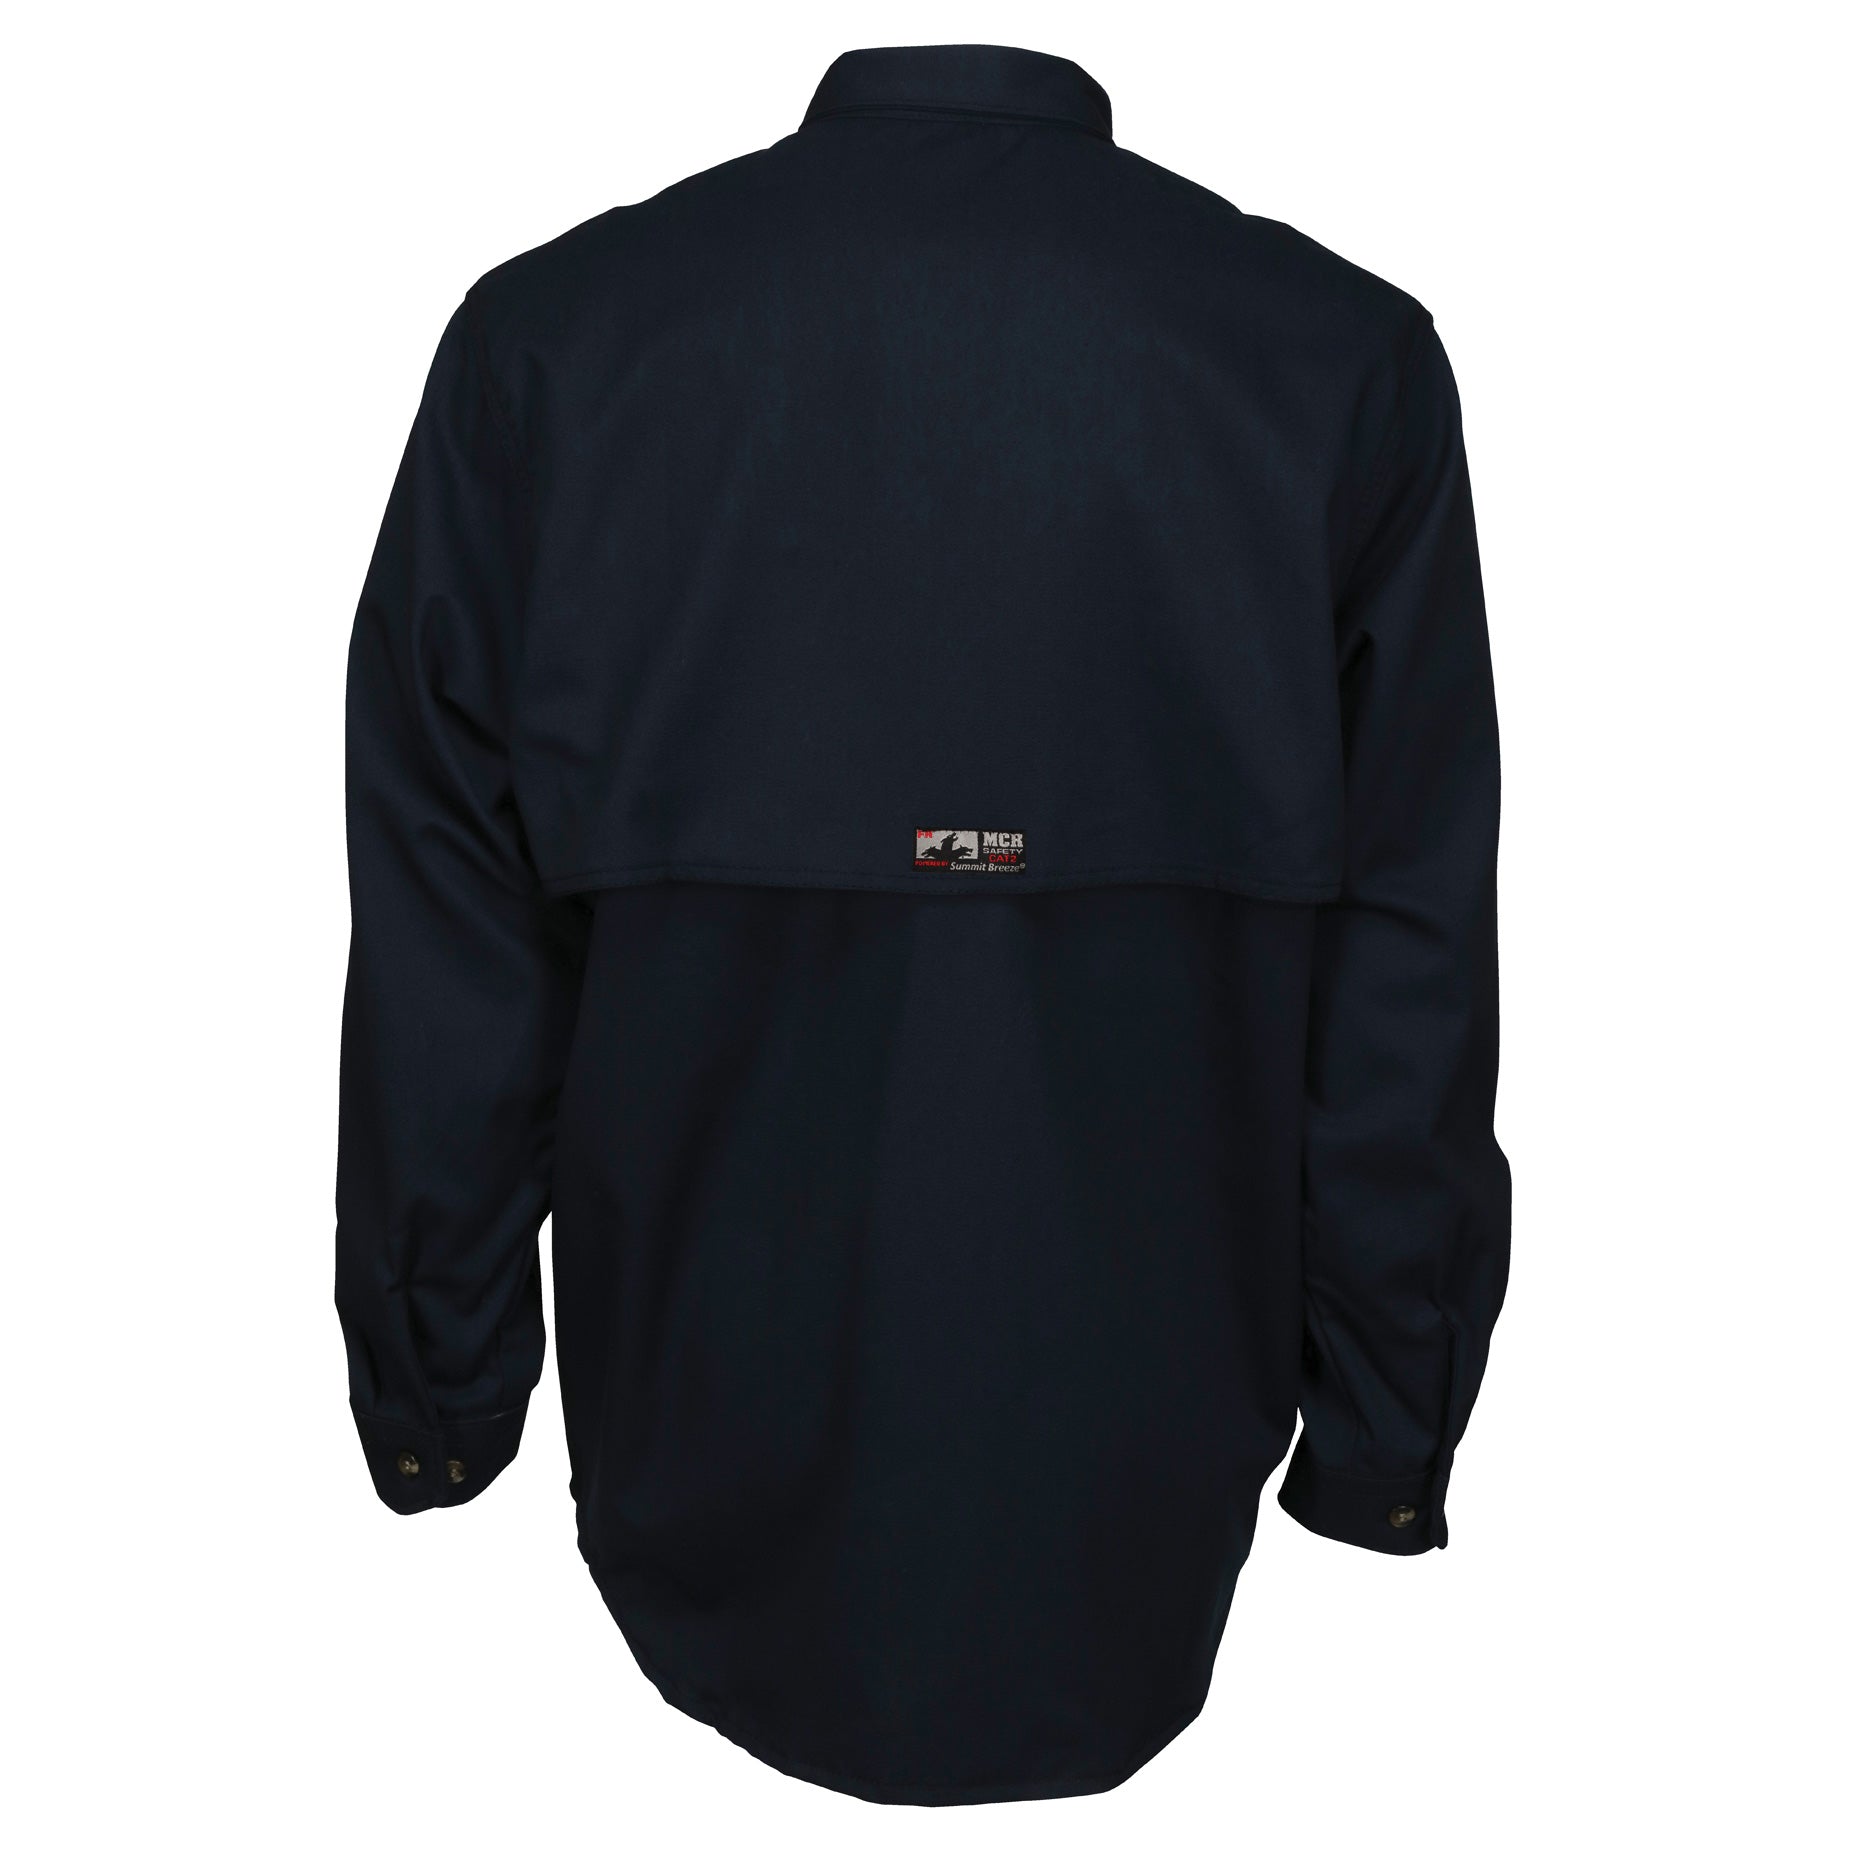 ARIAT - FR Vented Work Shirt, Malbec - Becker Safety and Supply